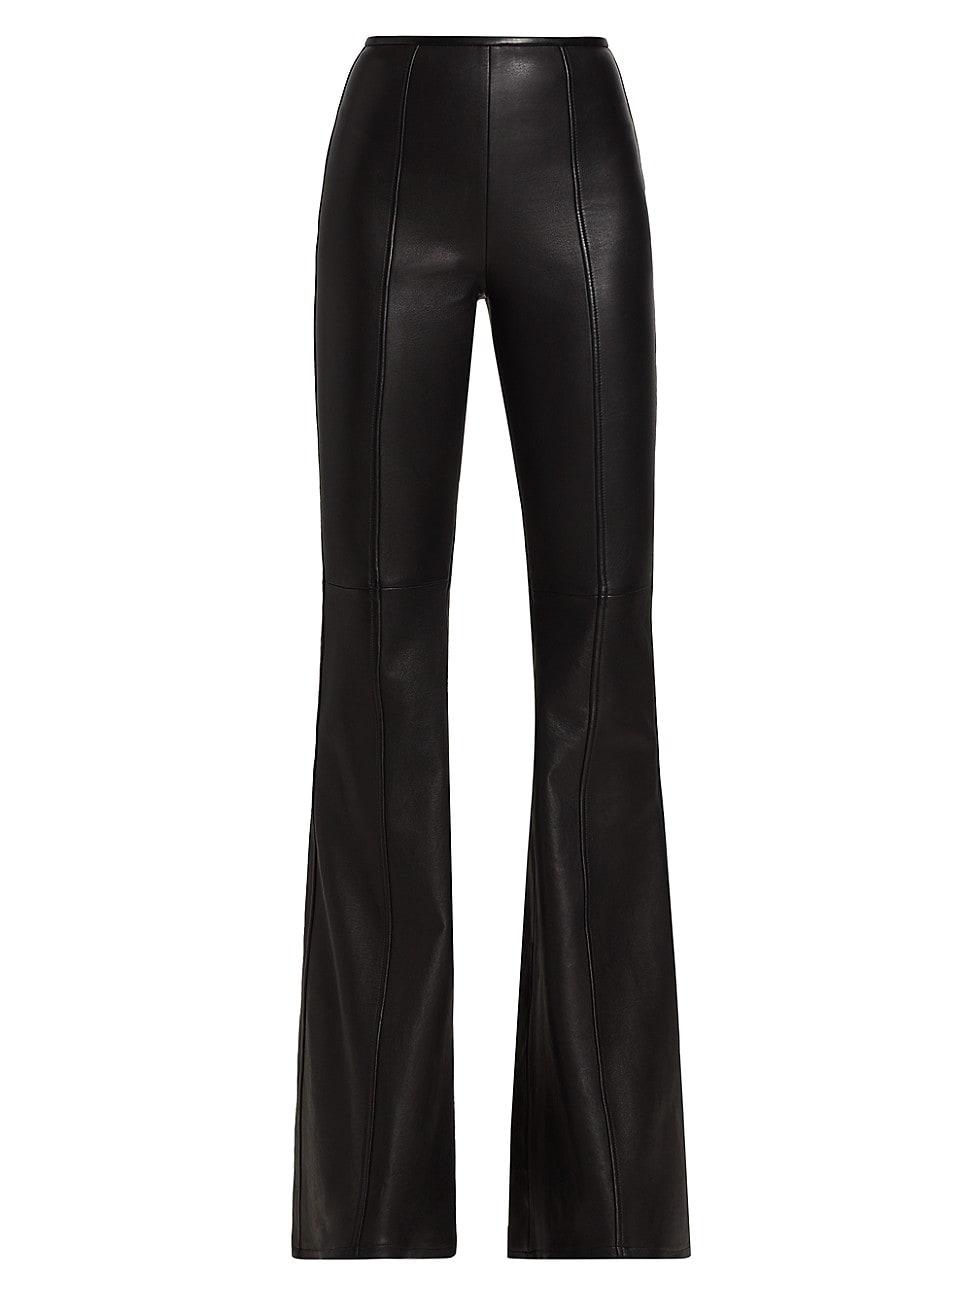 Alexander Wang Leather Flared Pants in Black | Lyst